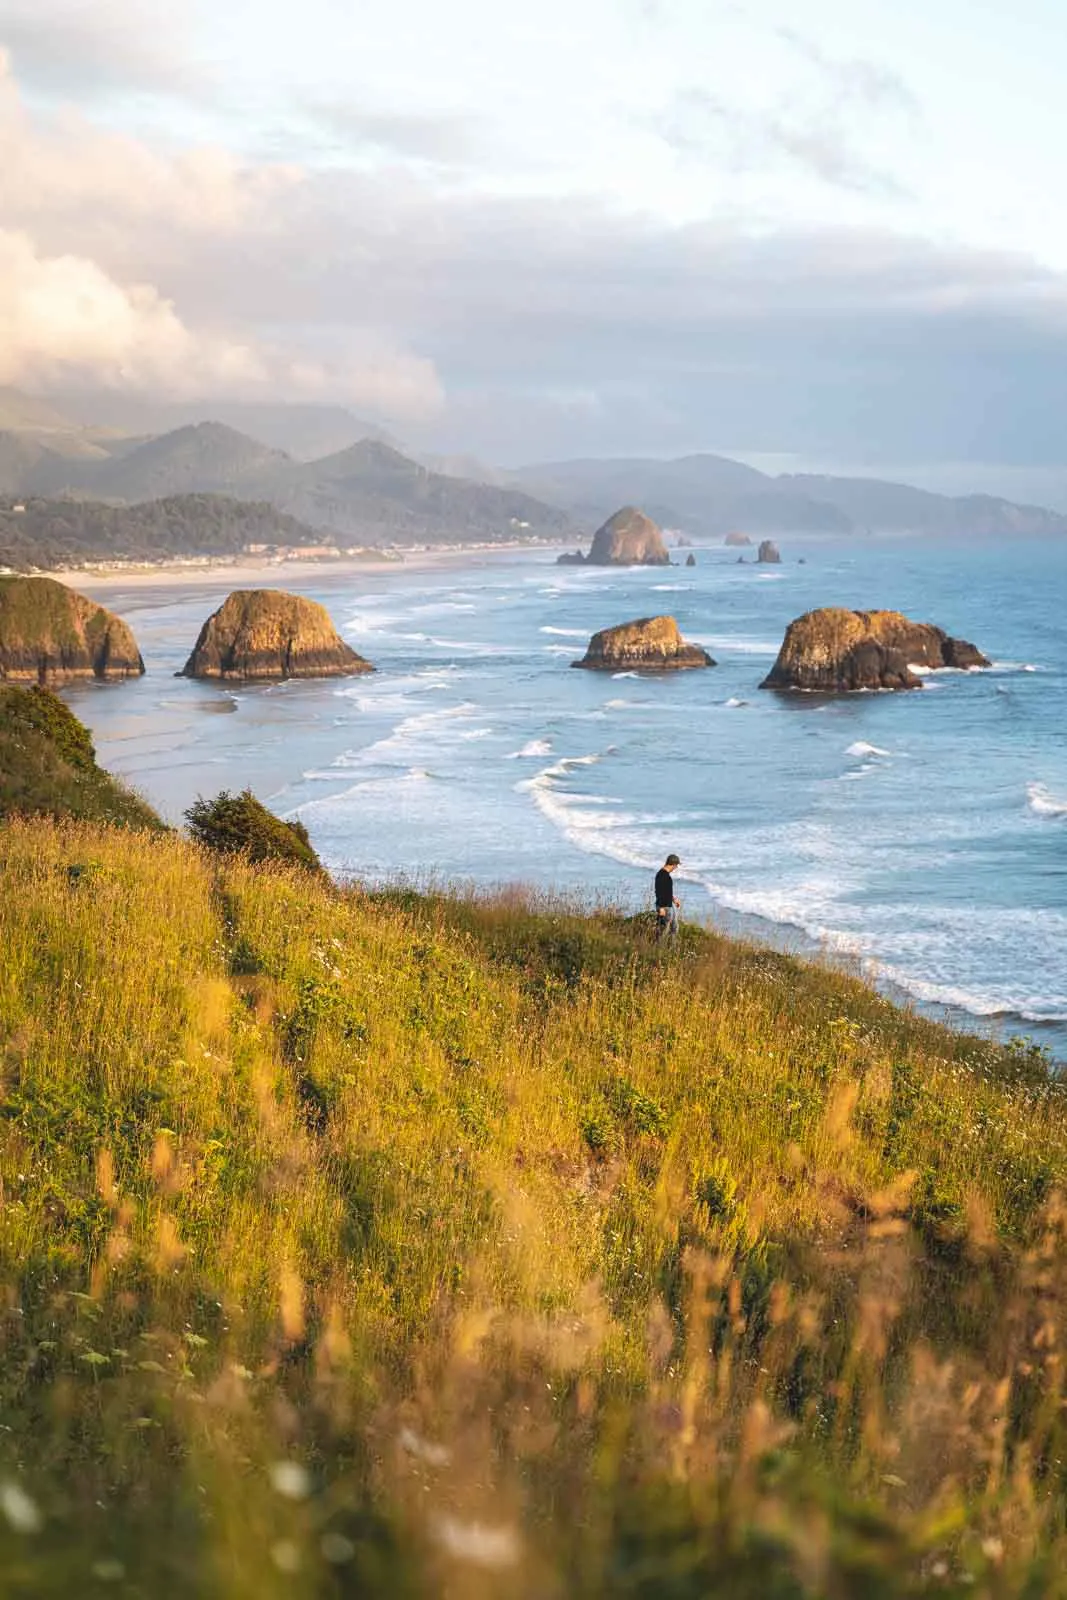 View of person on grassy cliff with the ocean and rocky islands in the background at Ecola State Park on the Oregon Coast